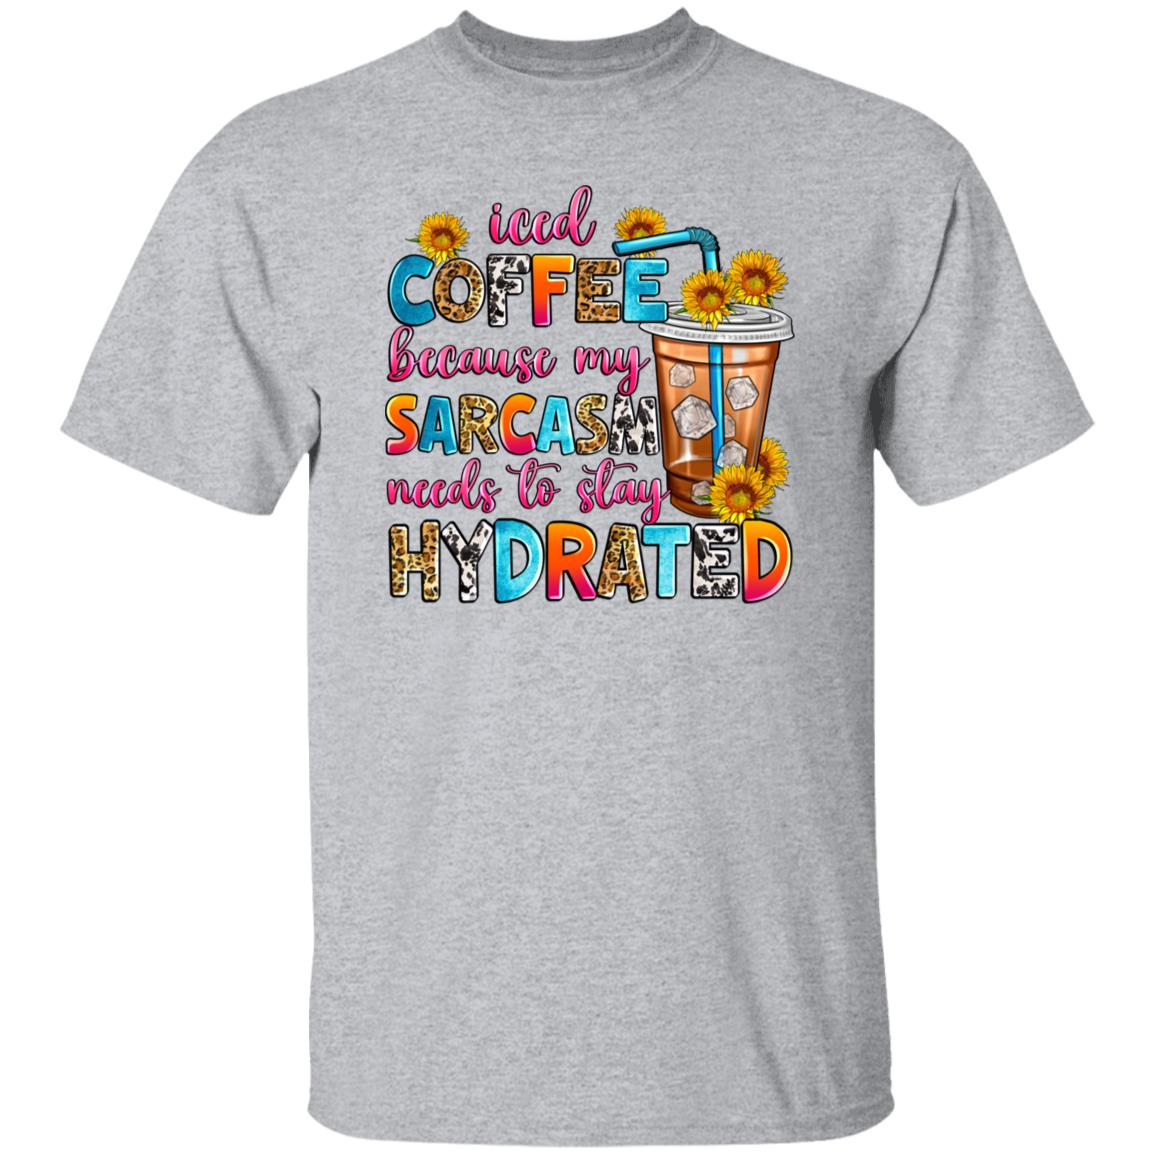 Iced coffee because my sarcasm needs to stay hydrated T-Shirt sarcastic Unisex Tee Sand White Sport Grey-Family-Gift-Planet